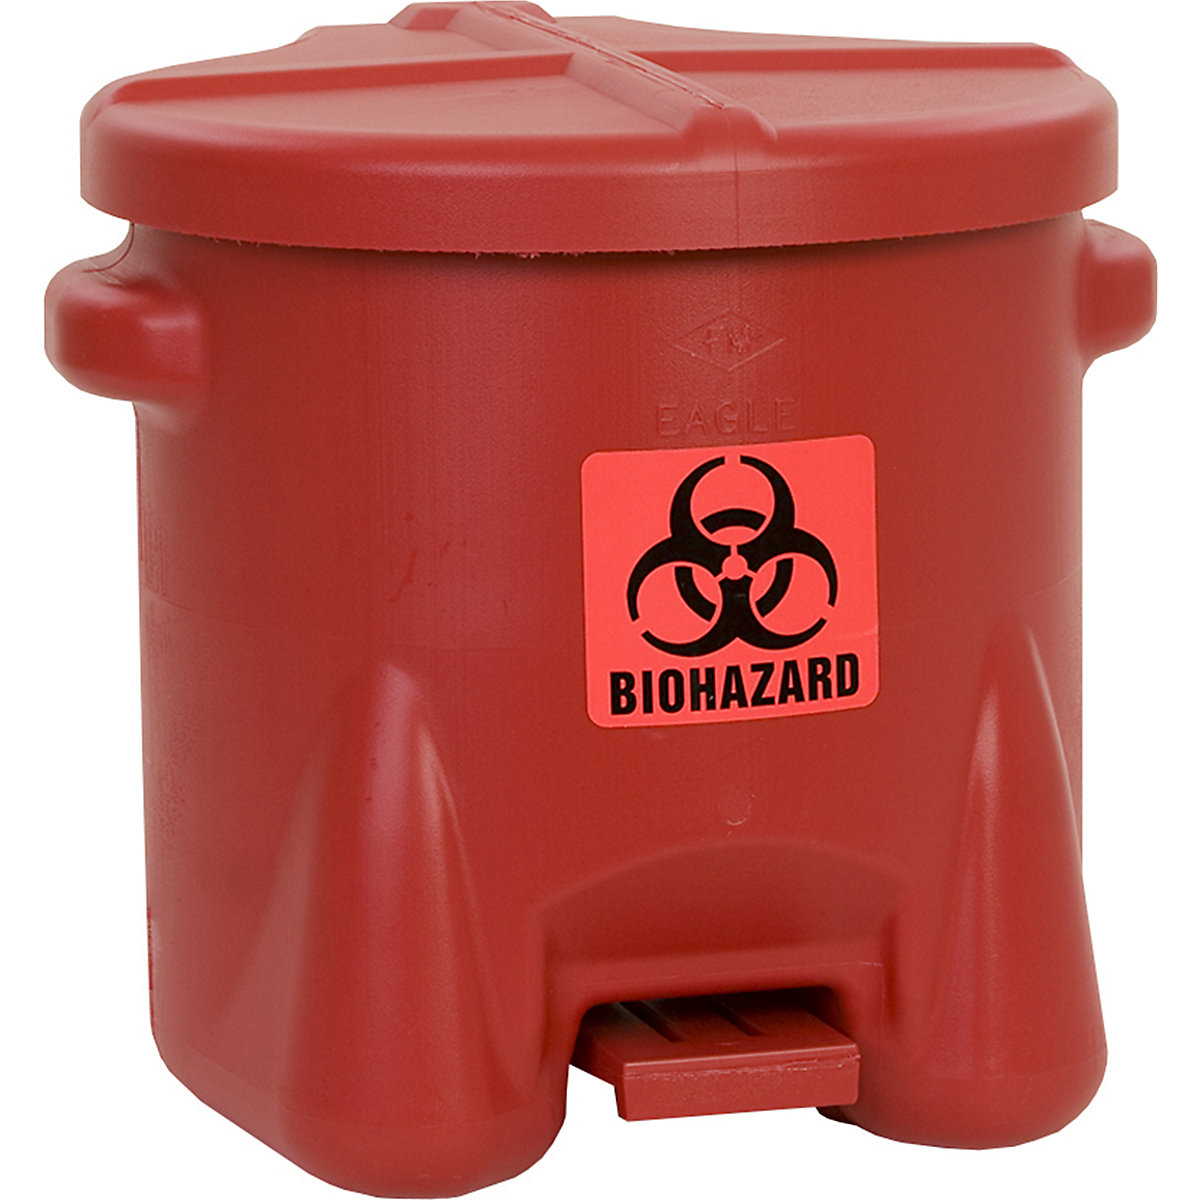 PE safety disposal can for biohazardous waste - Justrite